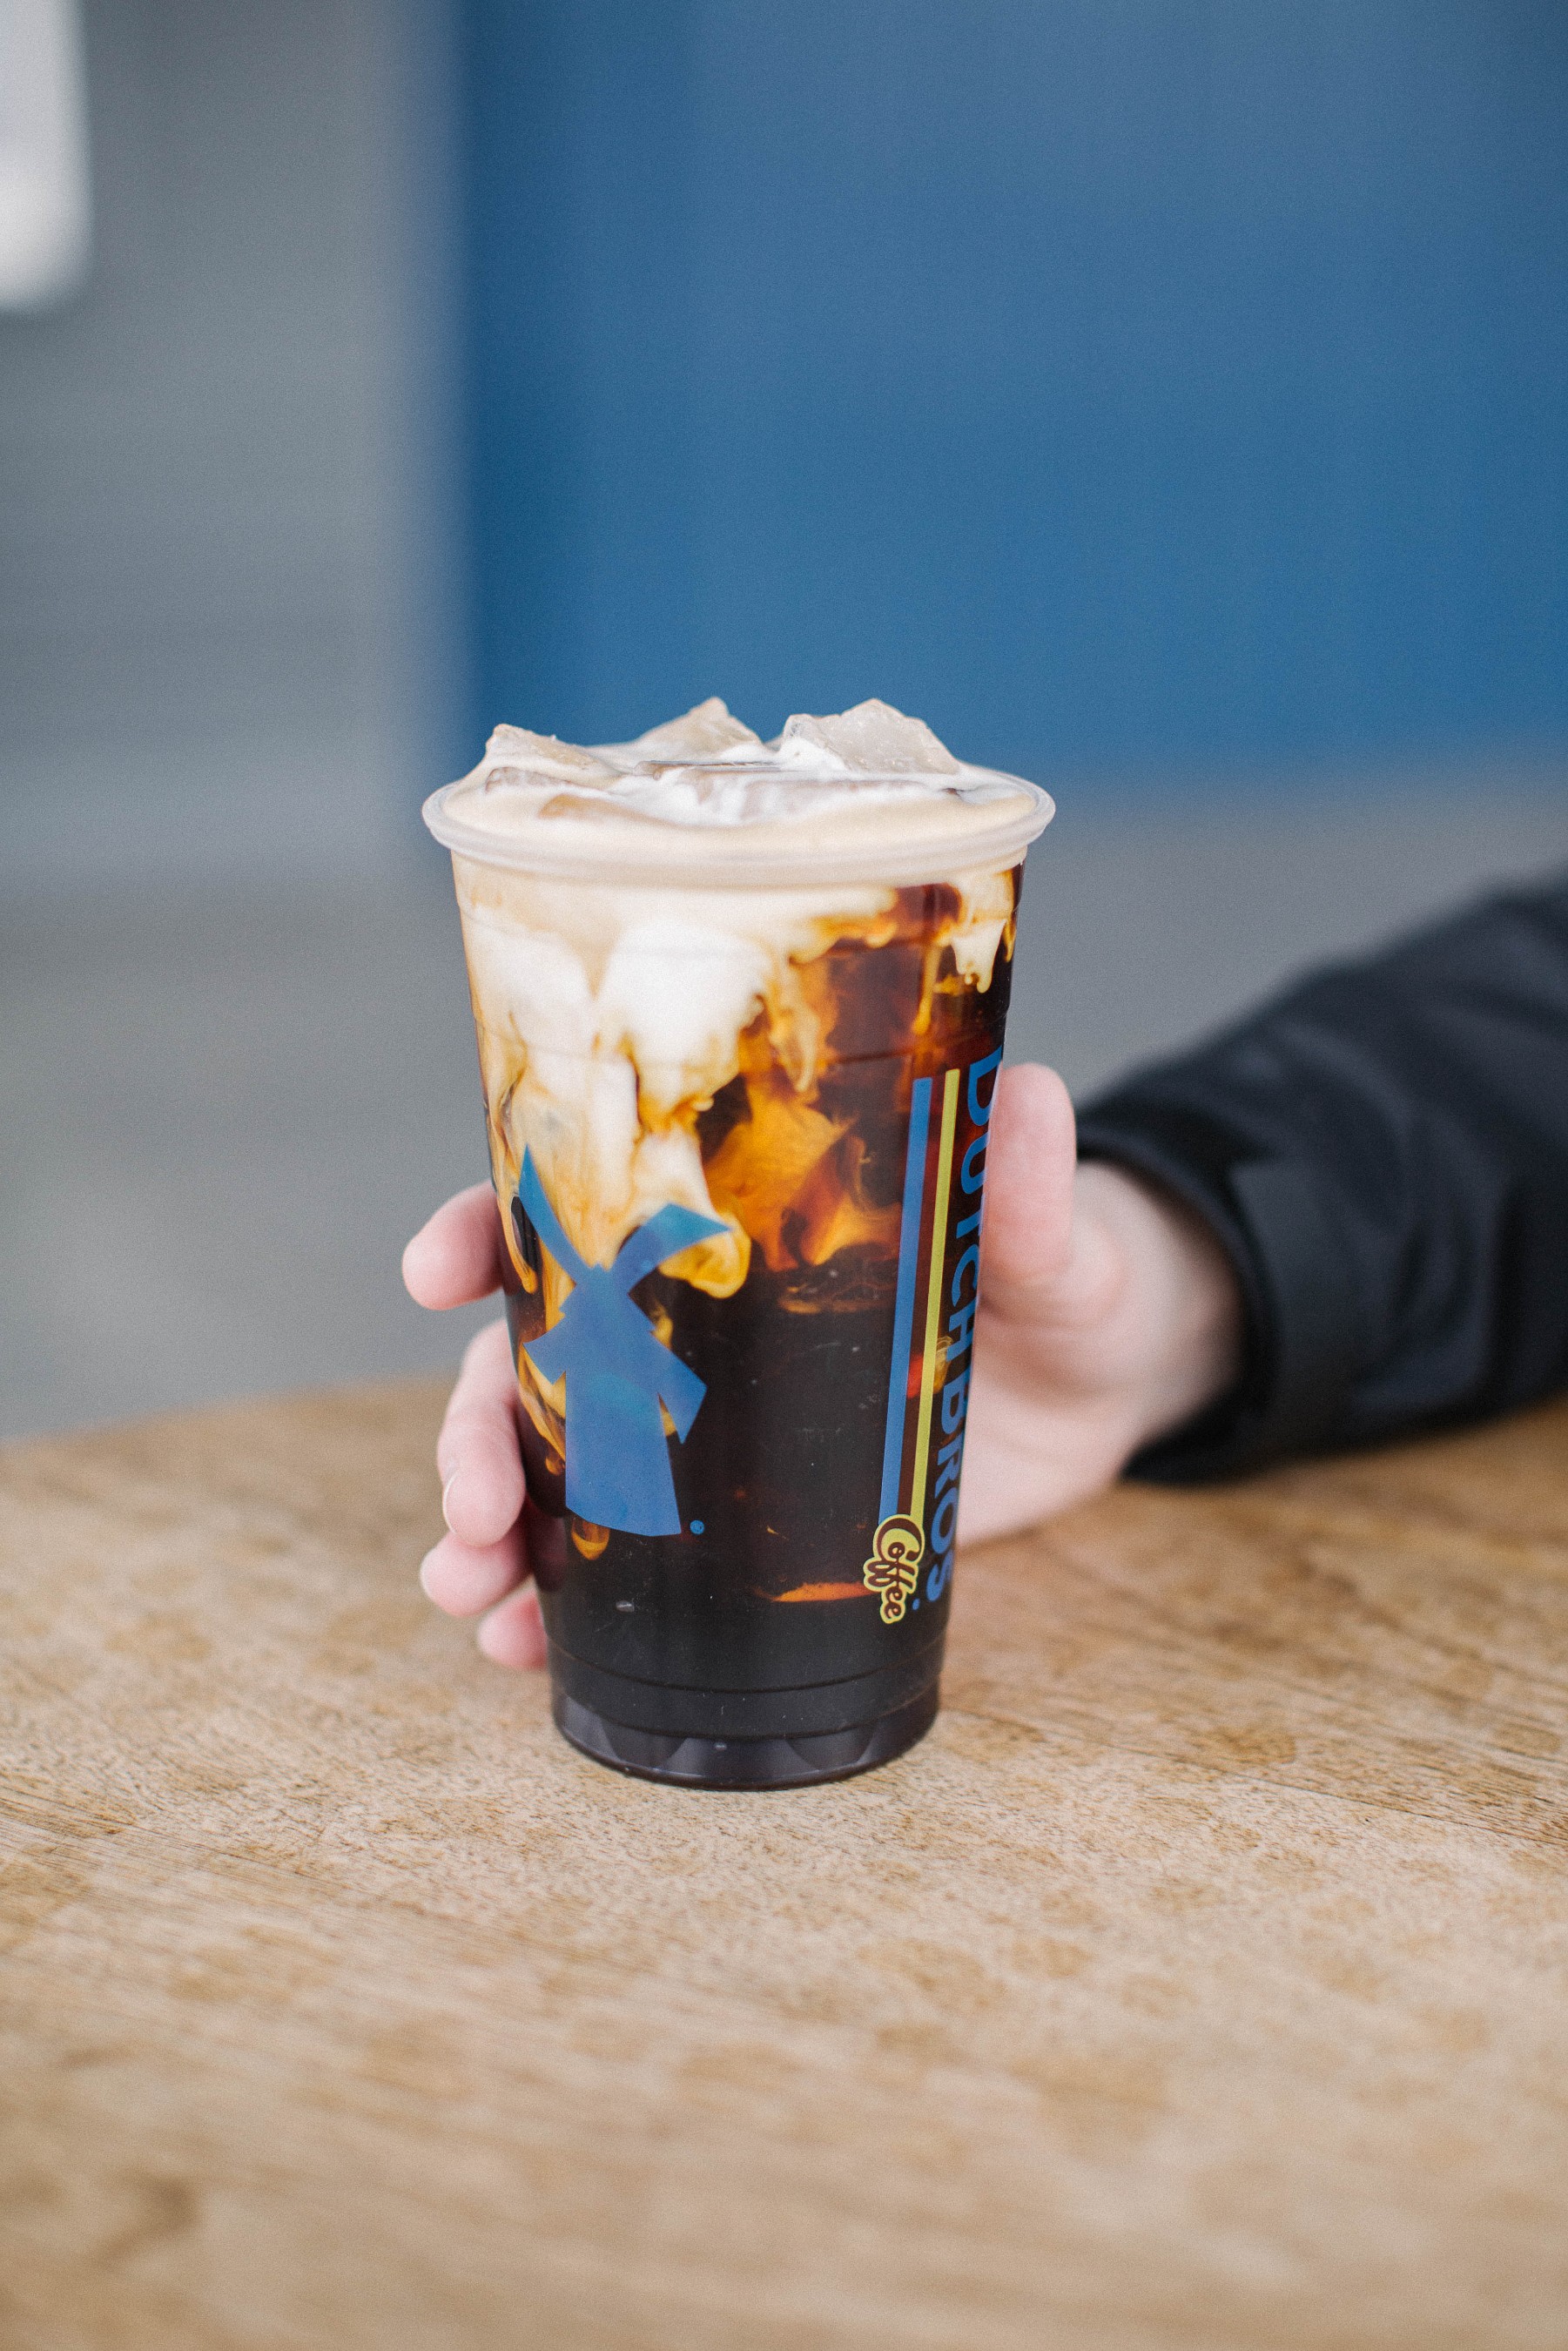 The National Cold Brew Day promotions lasts April 2-April 20